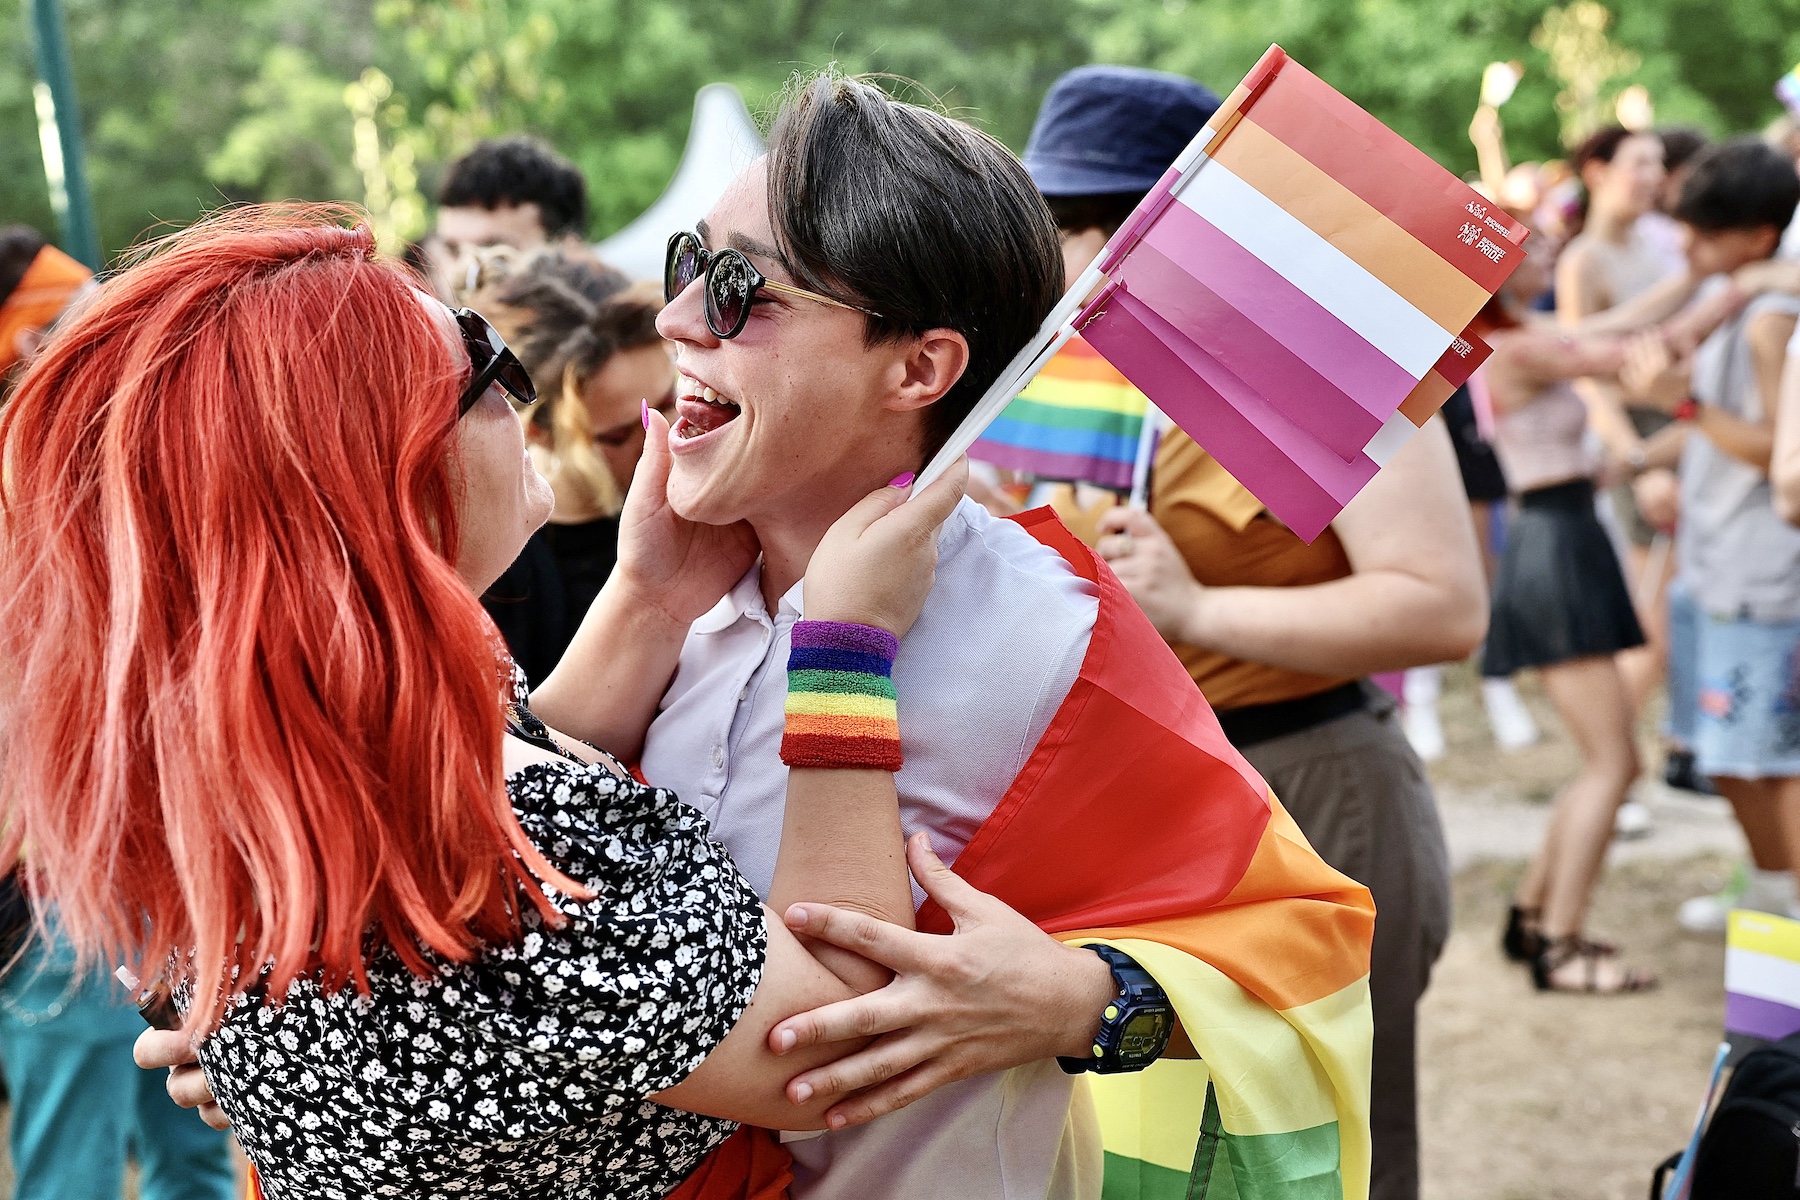 Two people embrace each other at Romania's Pride march 